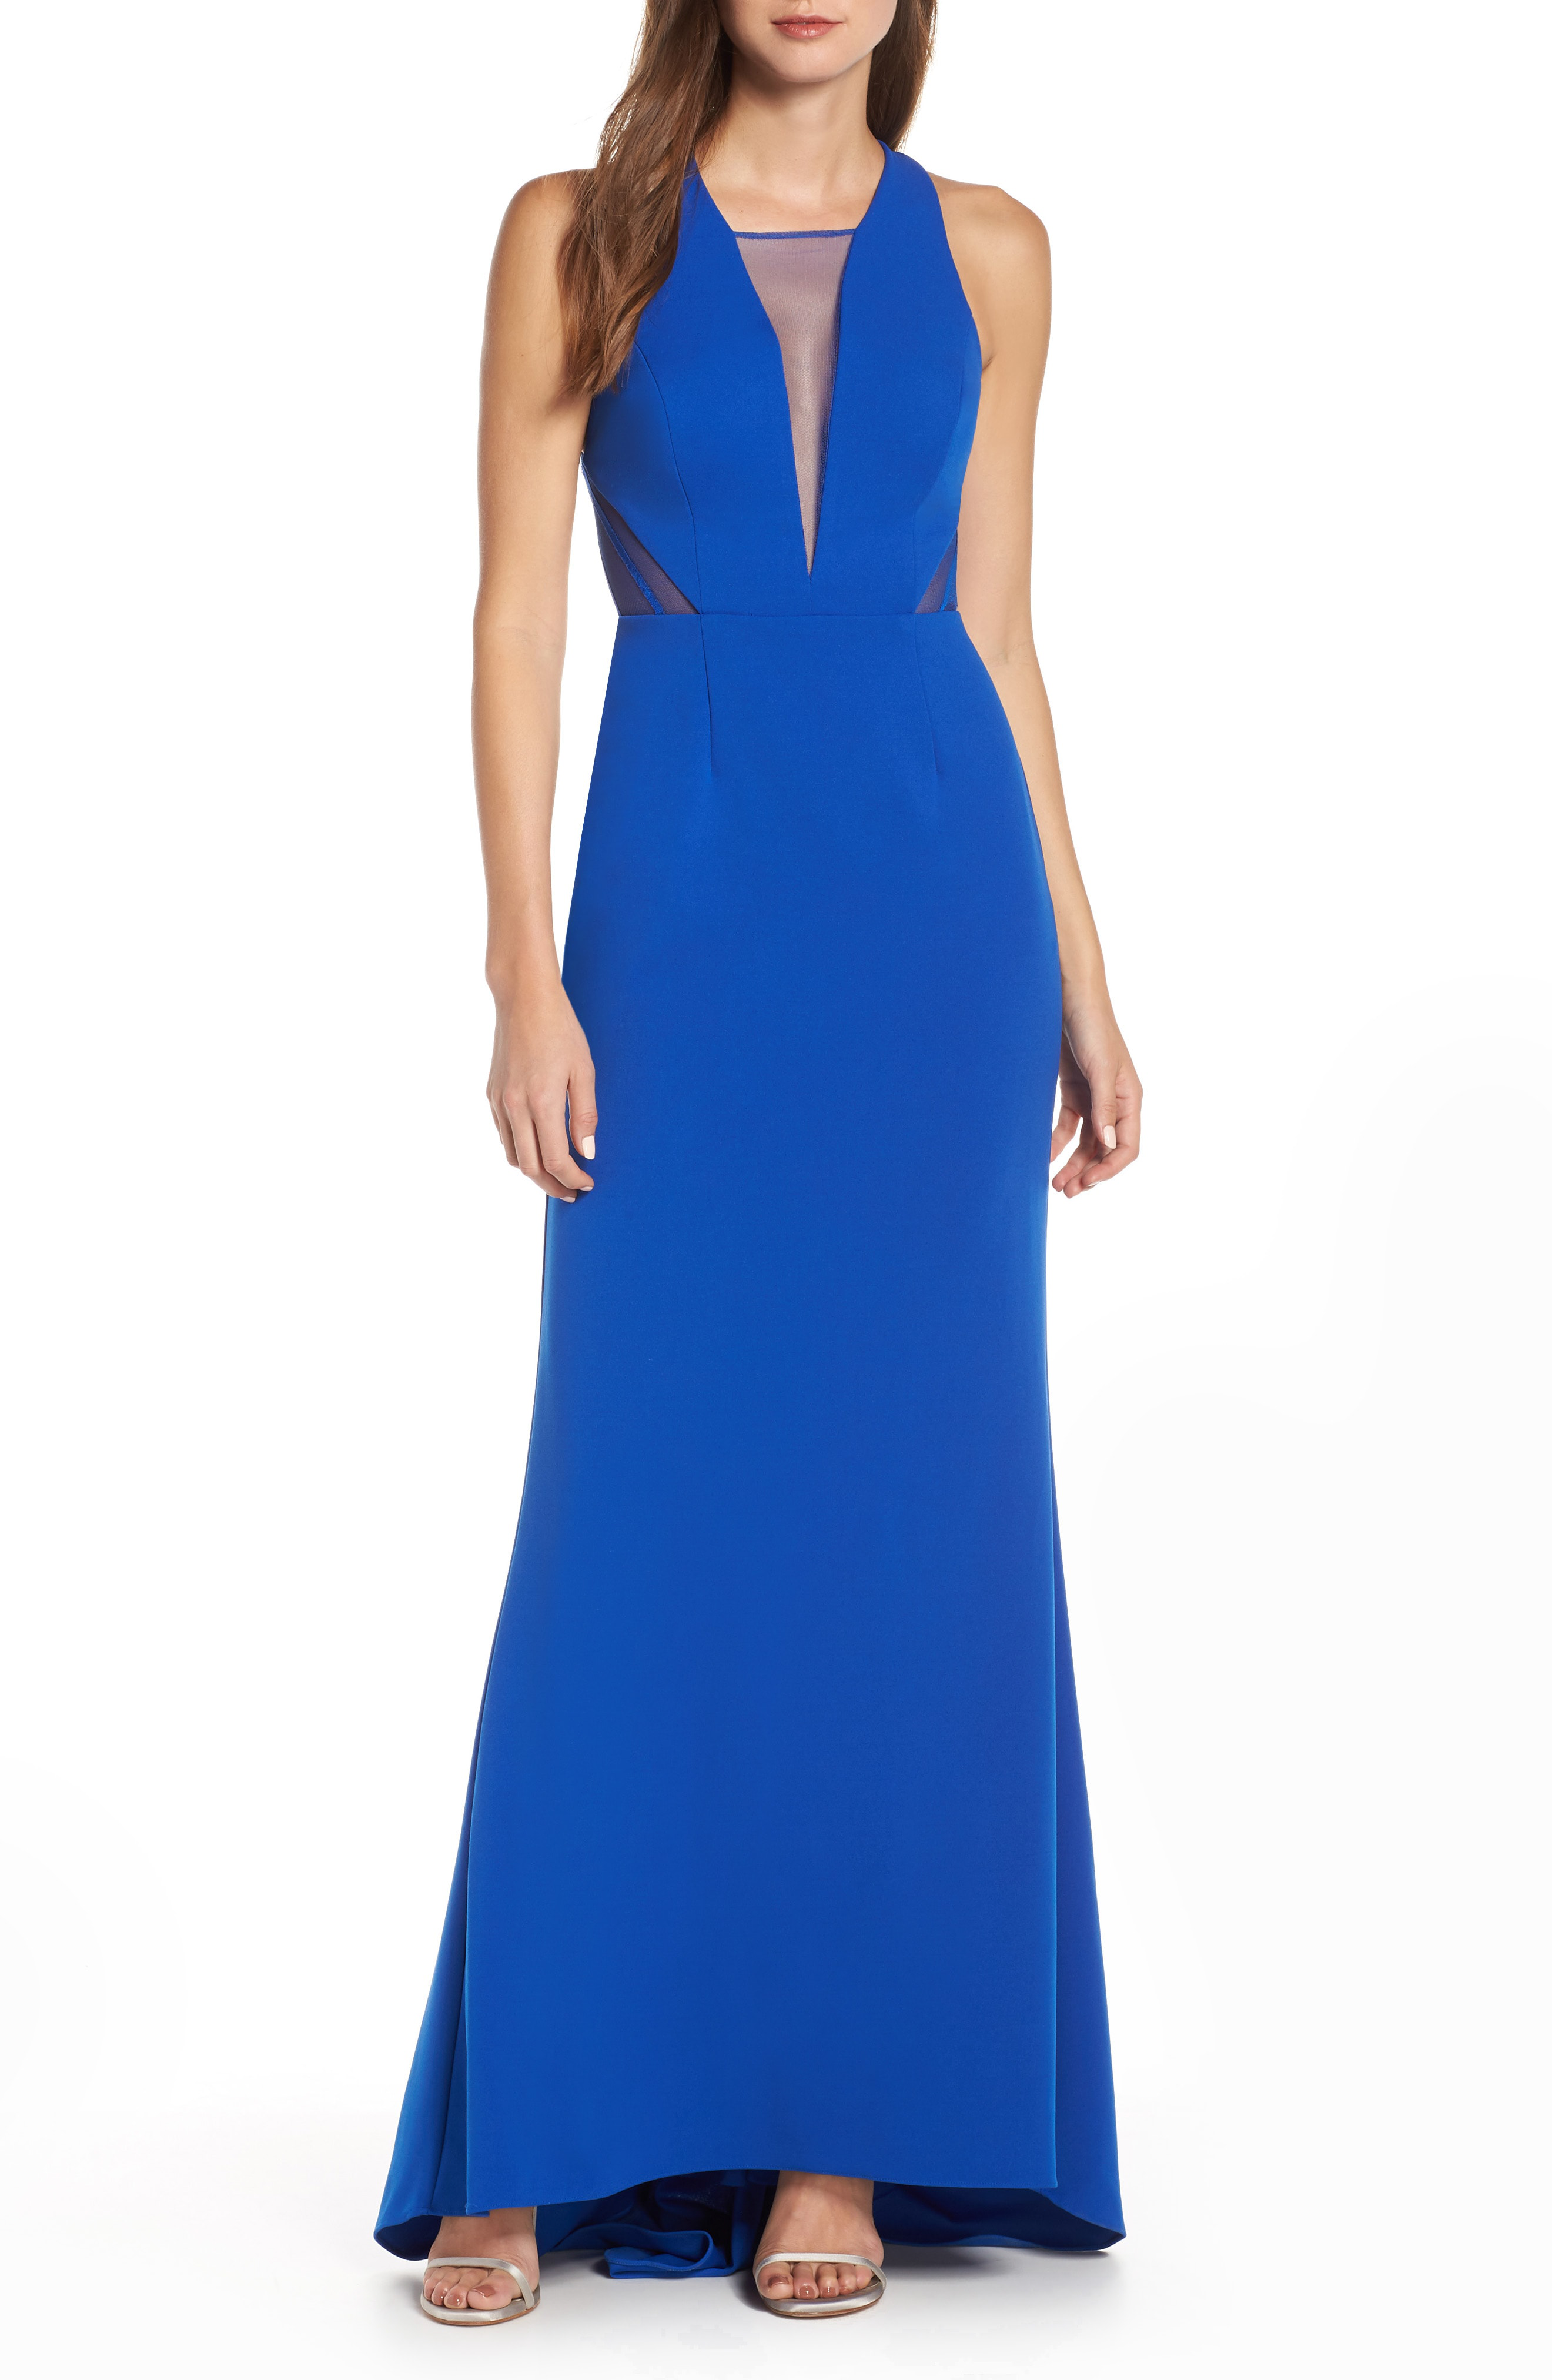 jf2021,adrianna papell lola jersey gown,aysultancandy.com